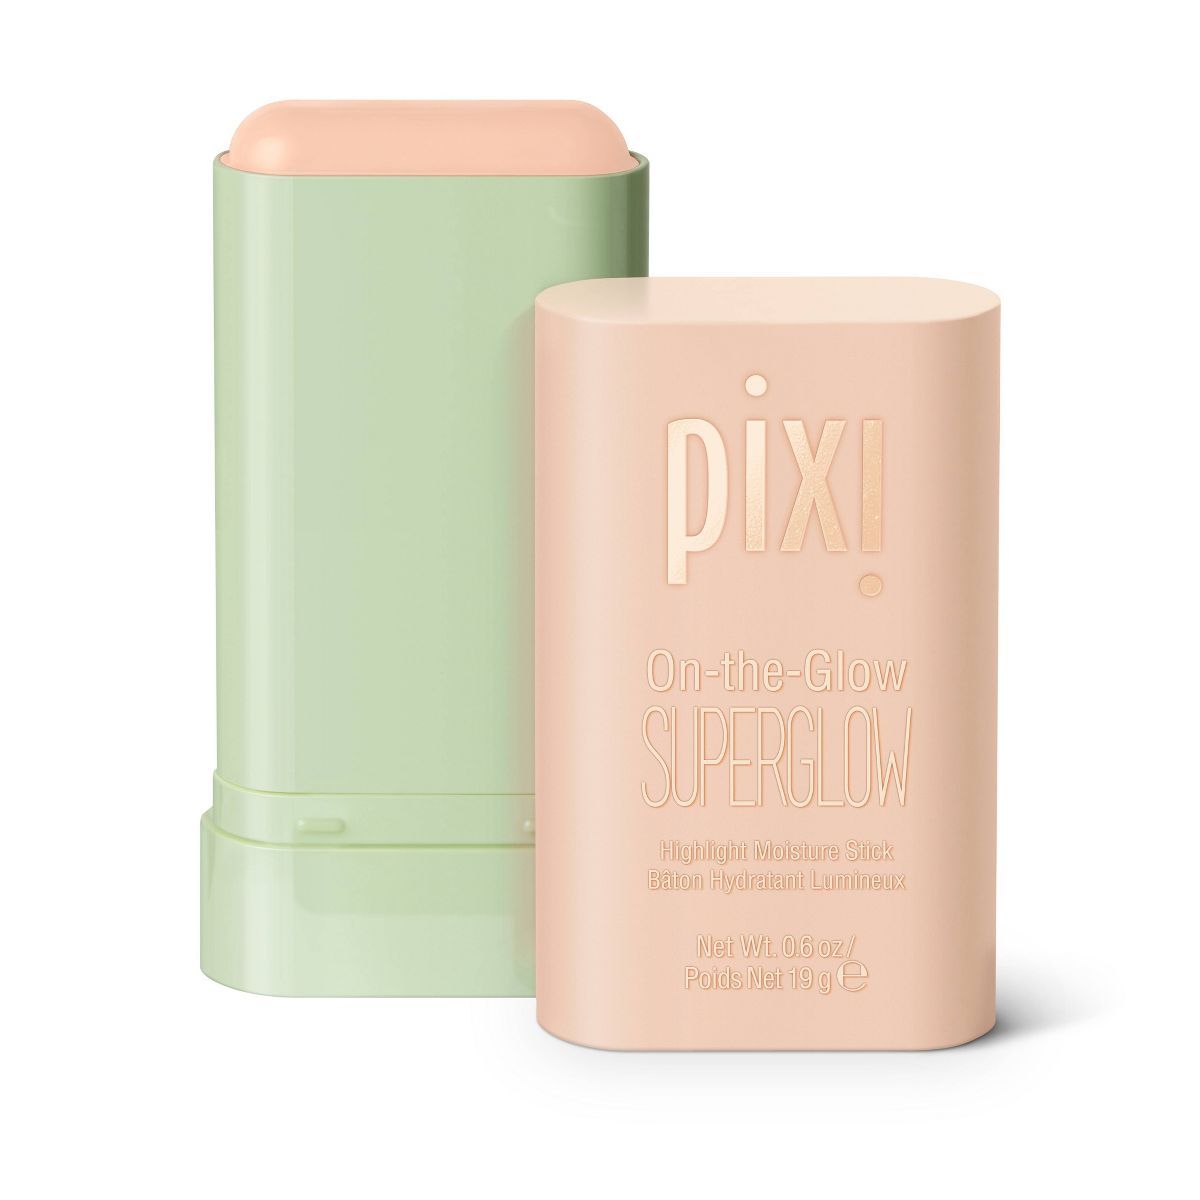 Pixi by Petra On-The-Glow Super Glow - 0.6oz | Target